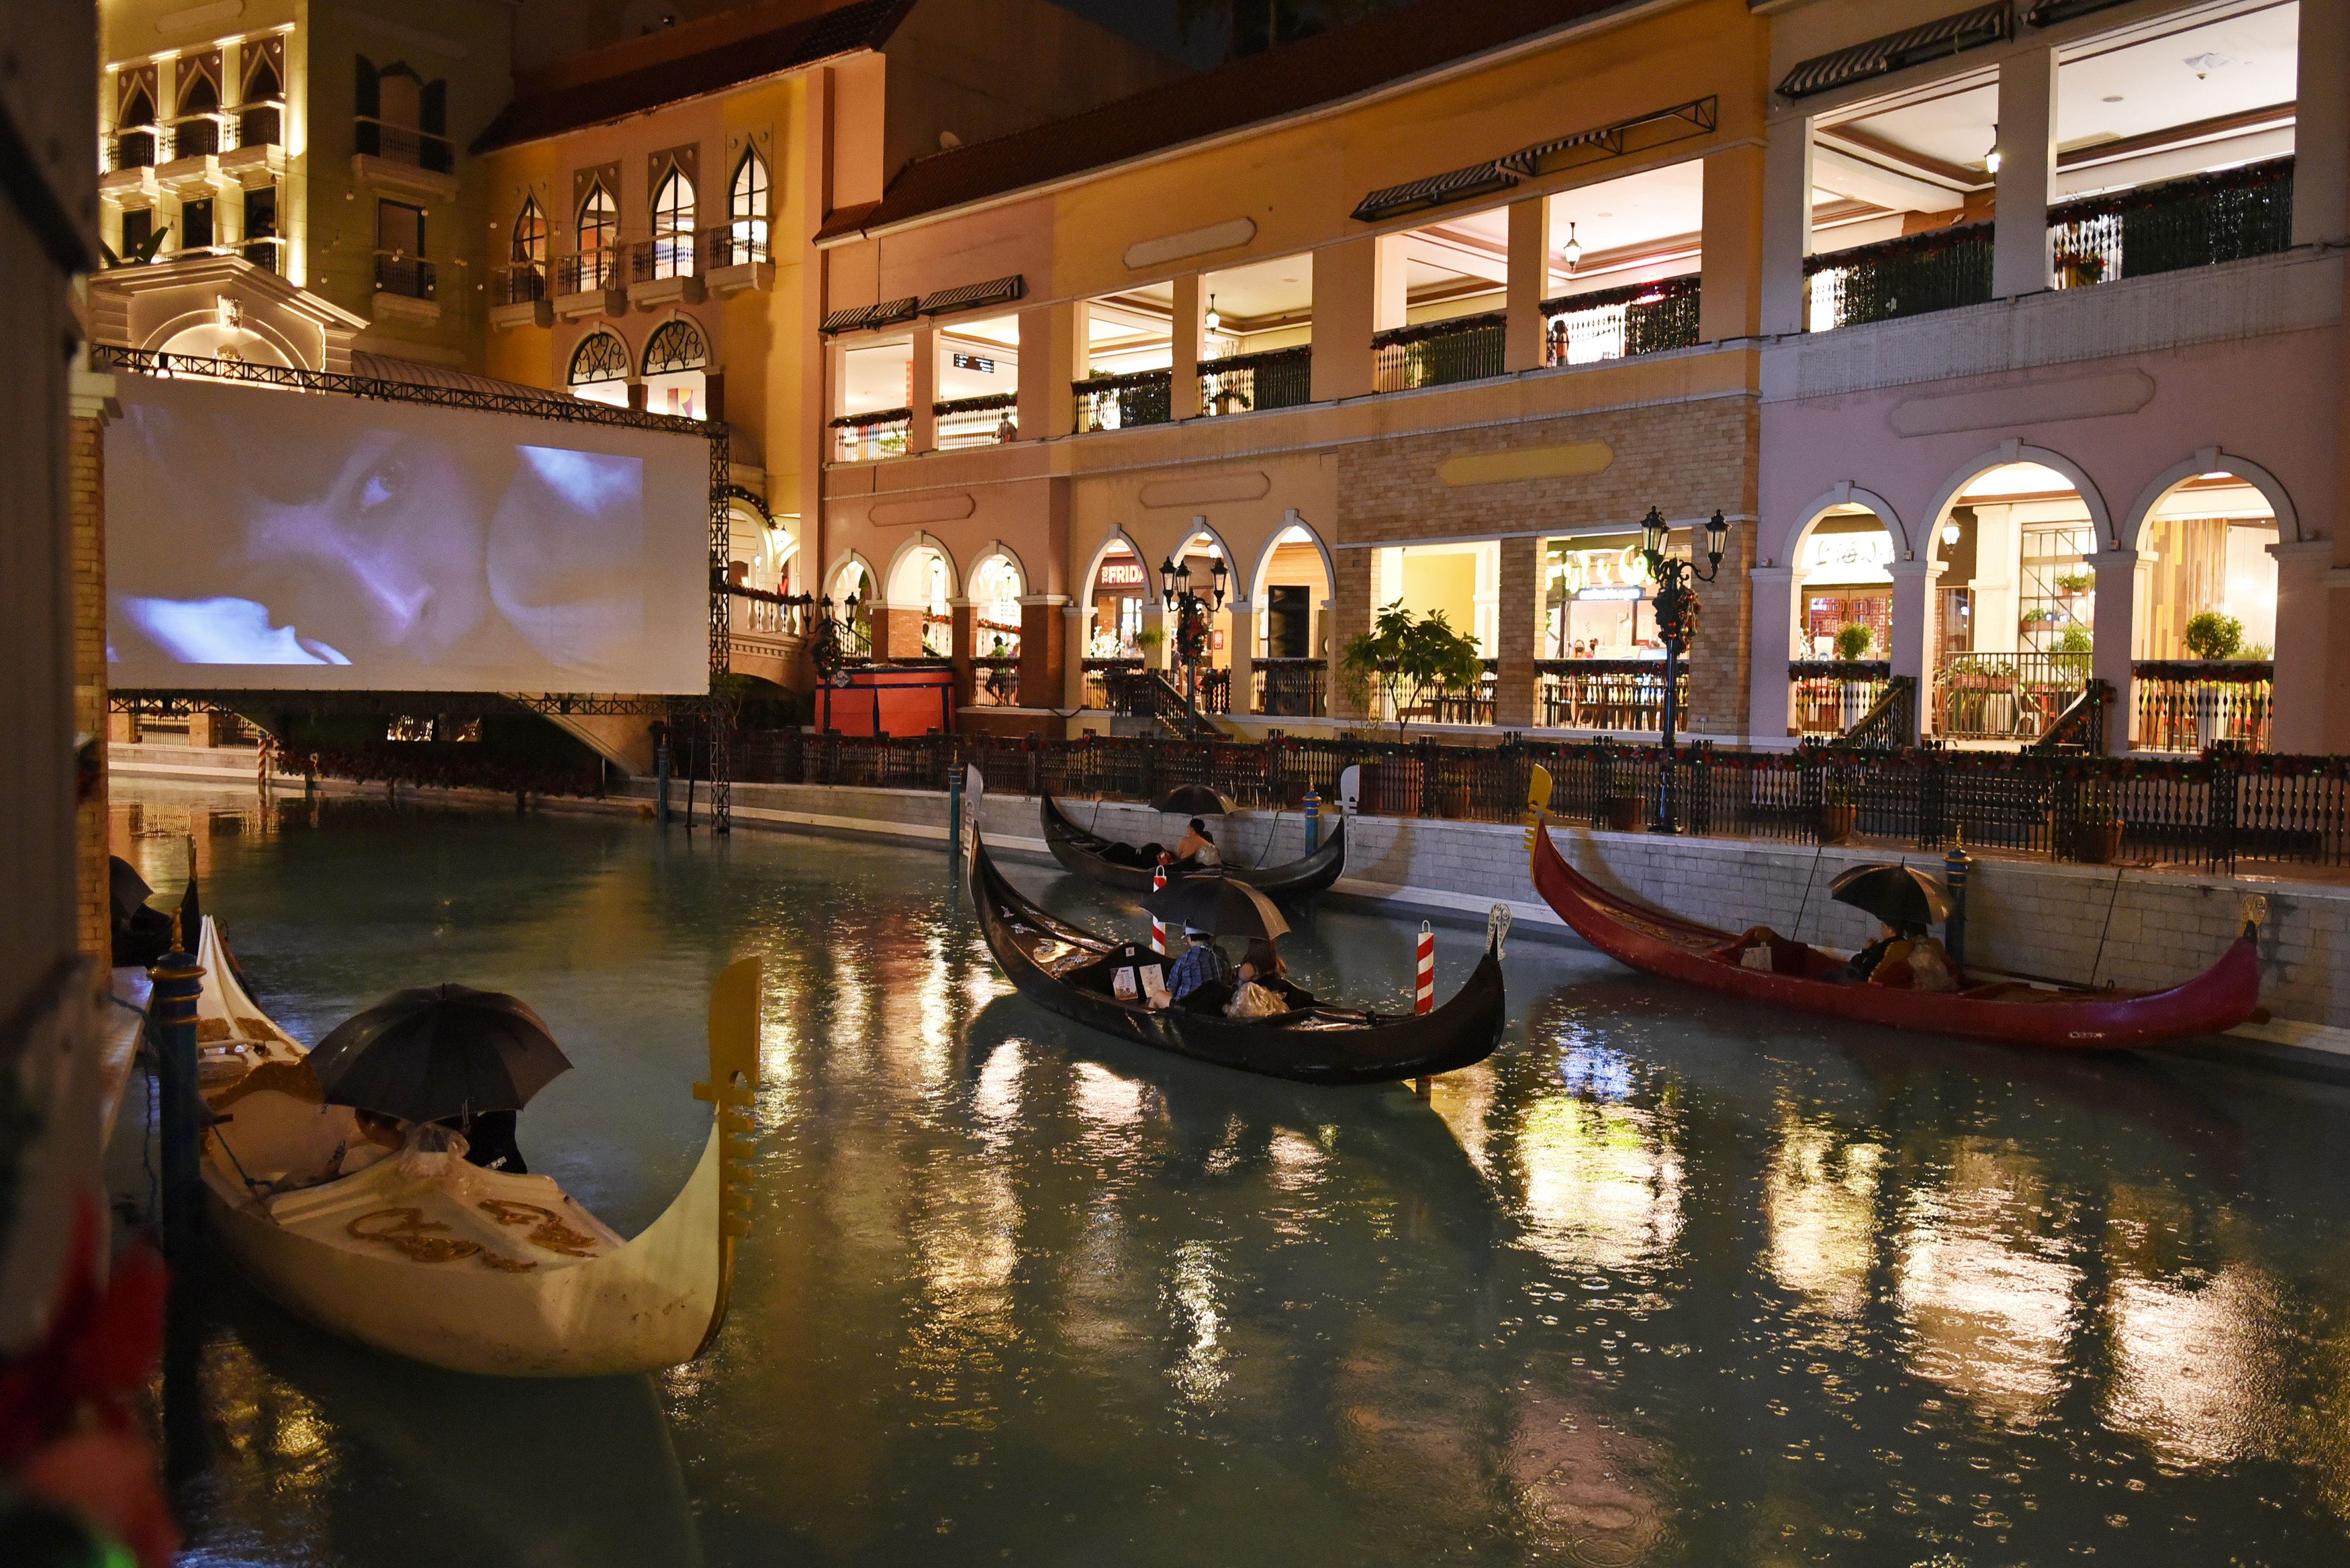 People on gondolas watch a movie while observing social distancing amid coronavirus disease (COVID-19) at a float-in cinema, in Venice Grand Canal Mall, Taguig City, Metro Manila